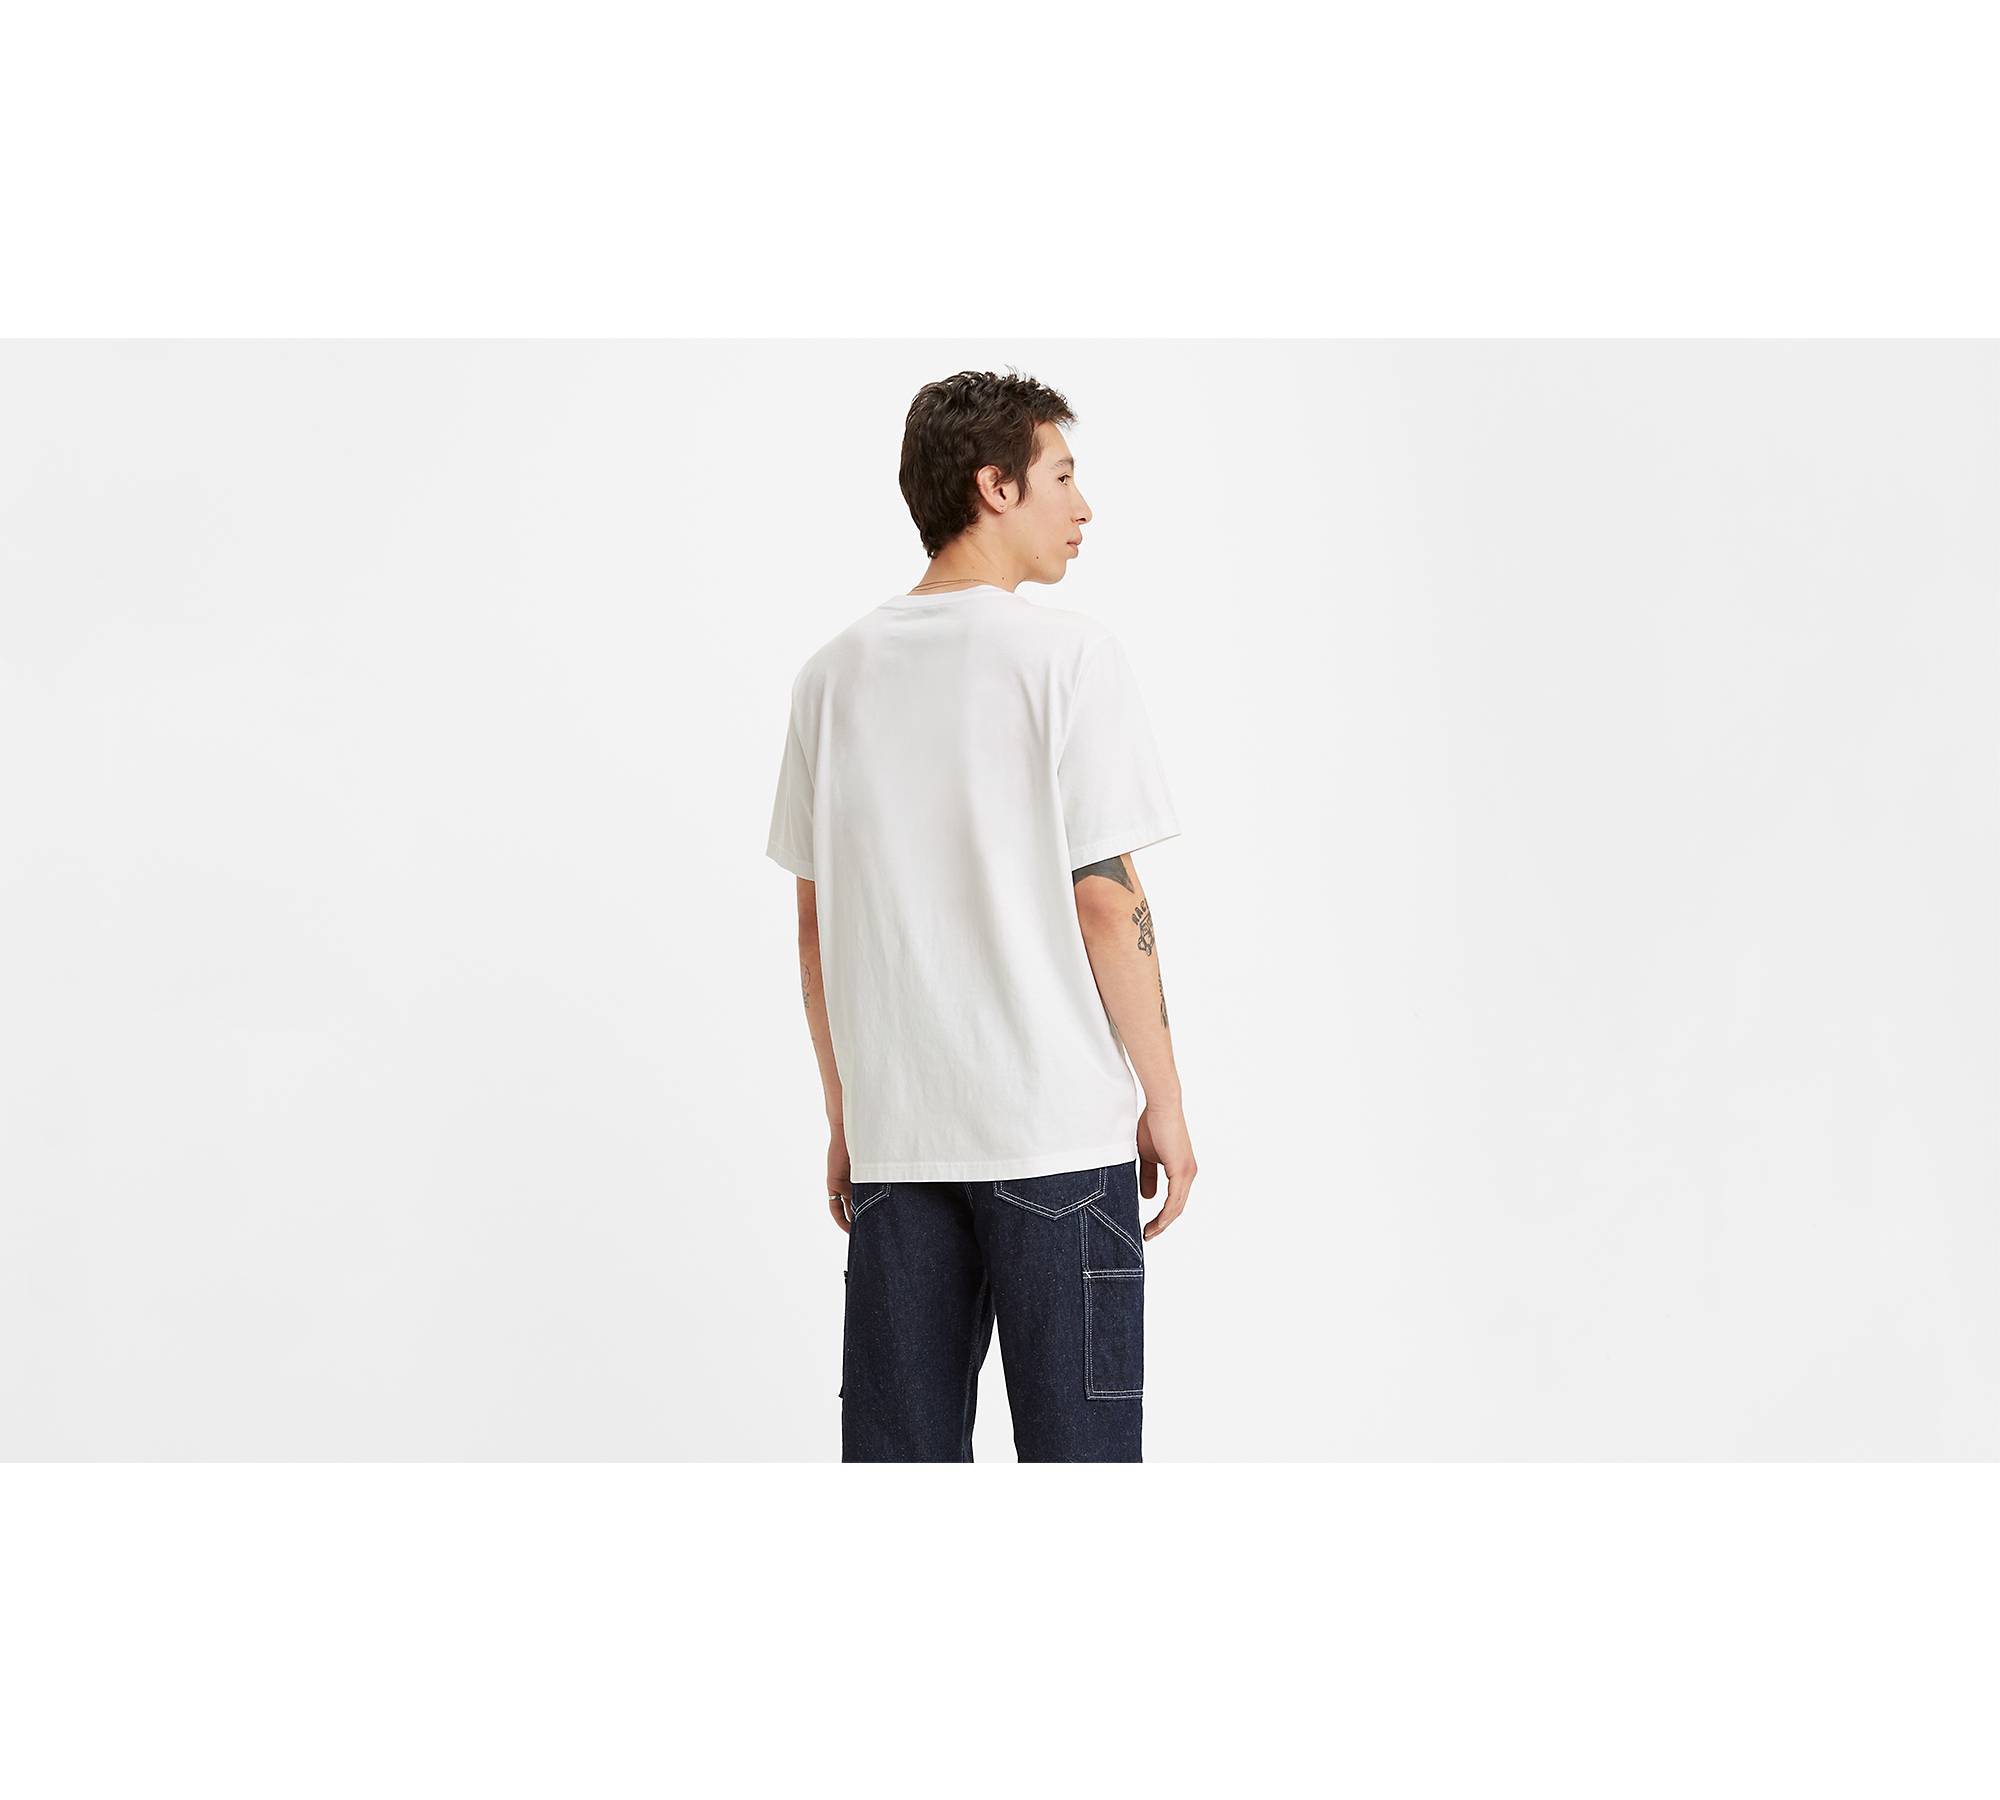 Relaxed Graphic Tee Shirt - Multi-color | Levi's® US